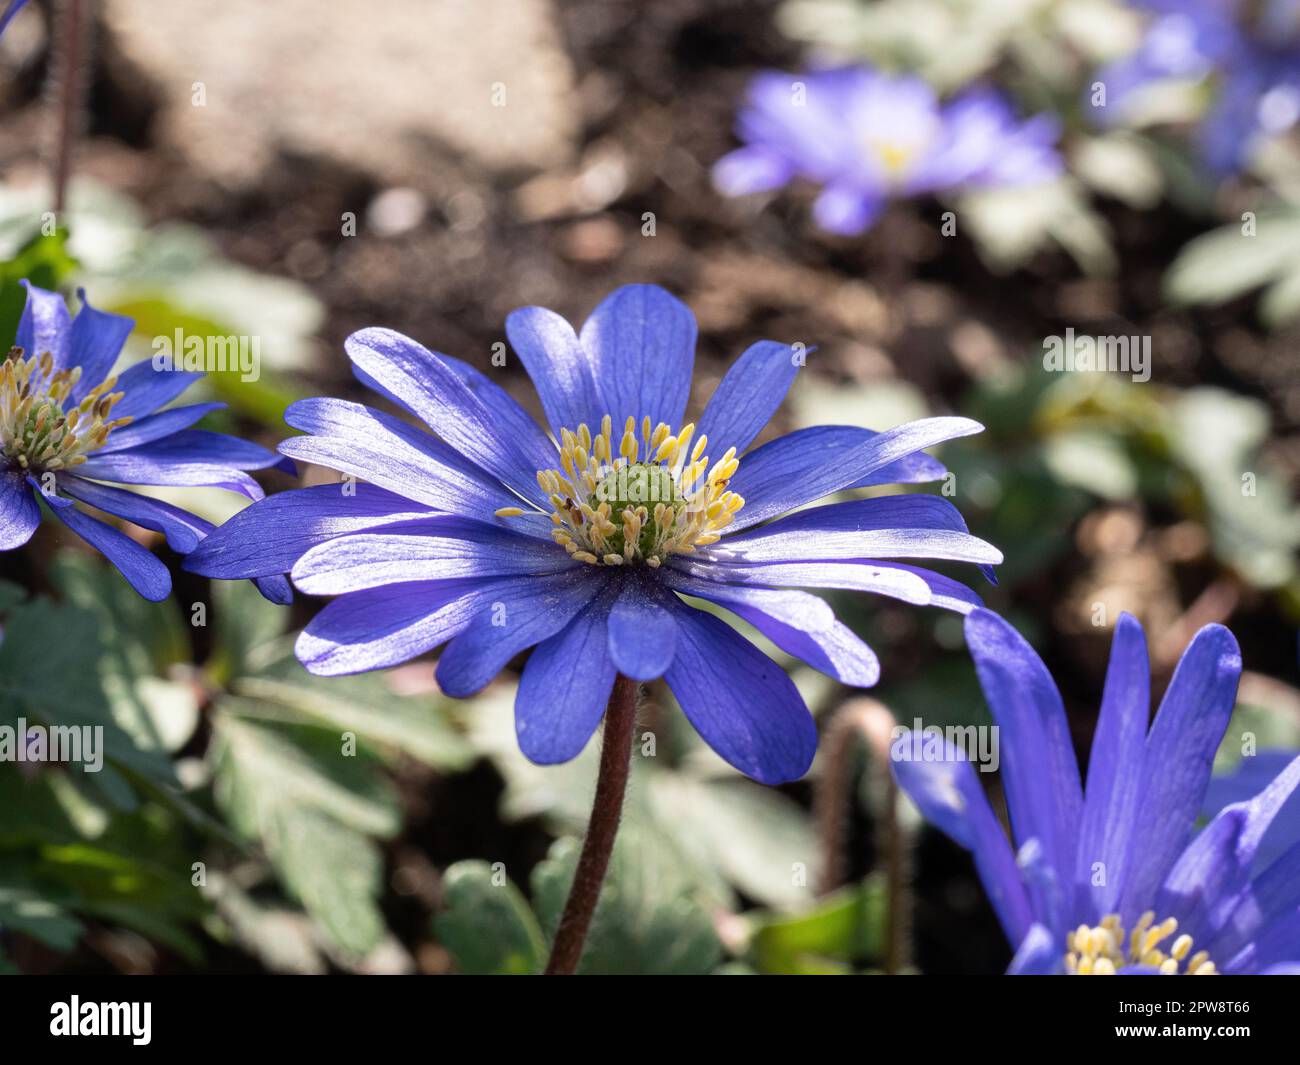 A group of early blue flowers of the low growing Anemone blanda Stock Photo